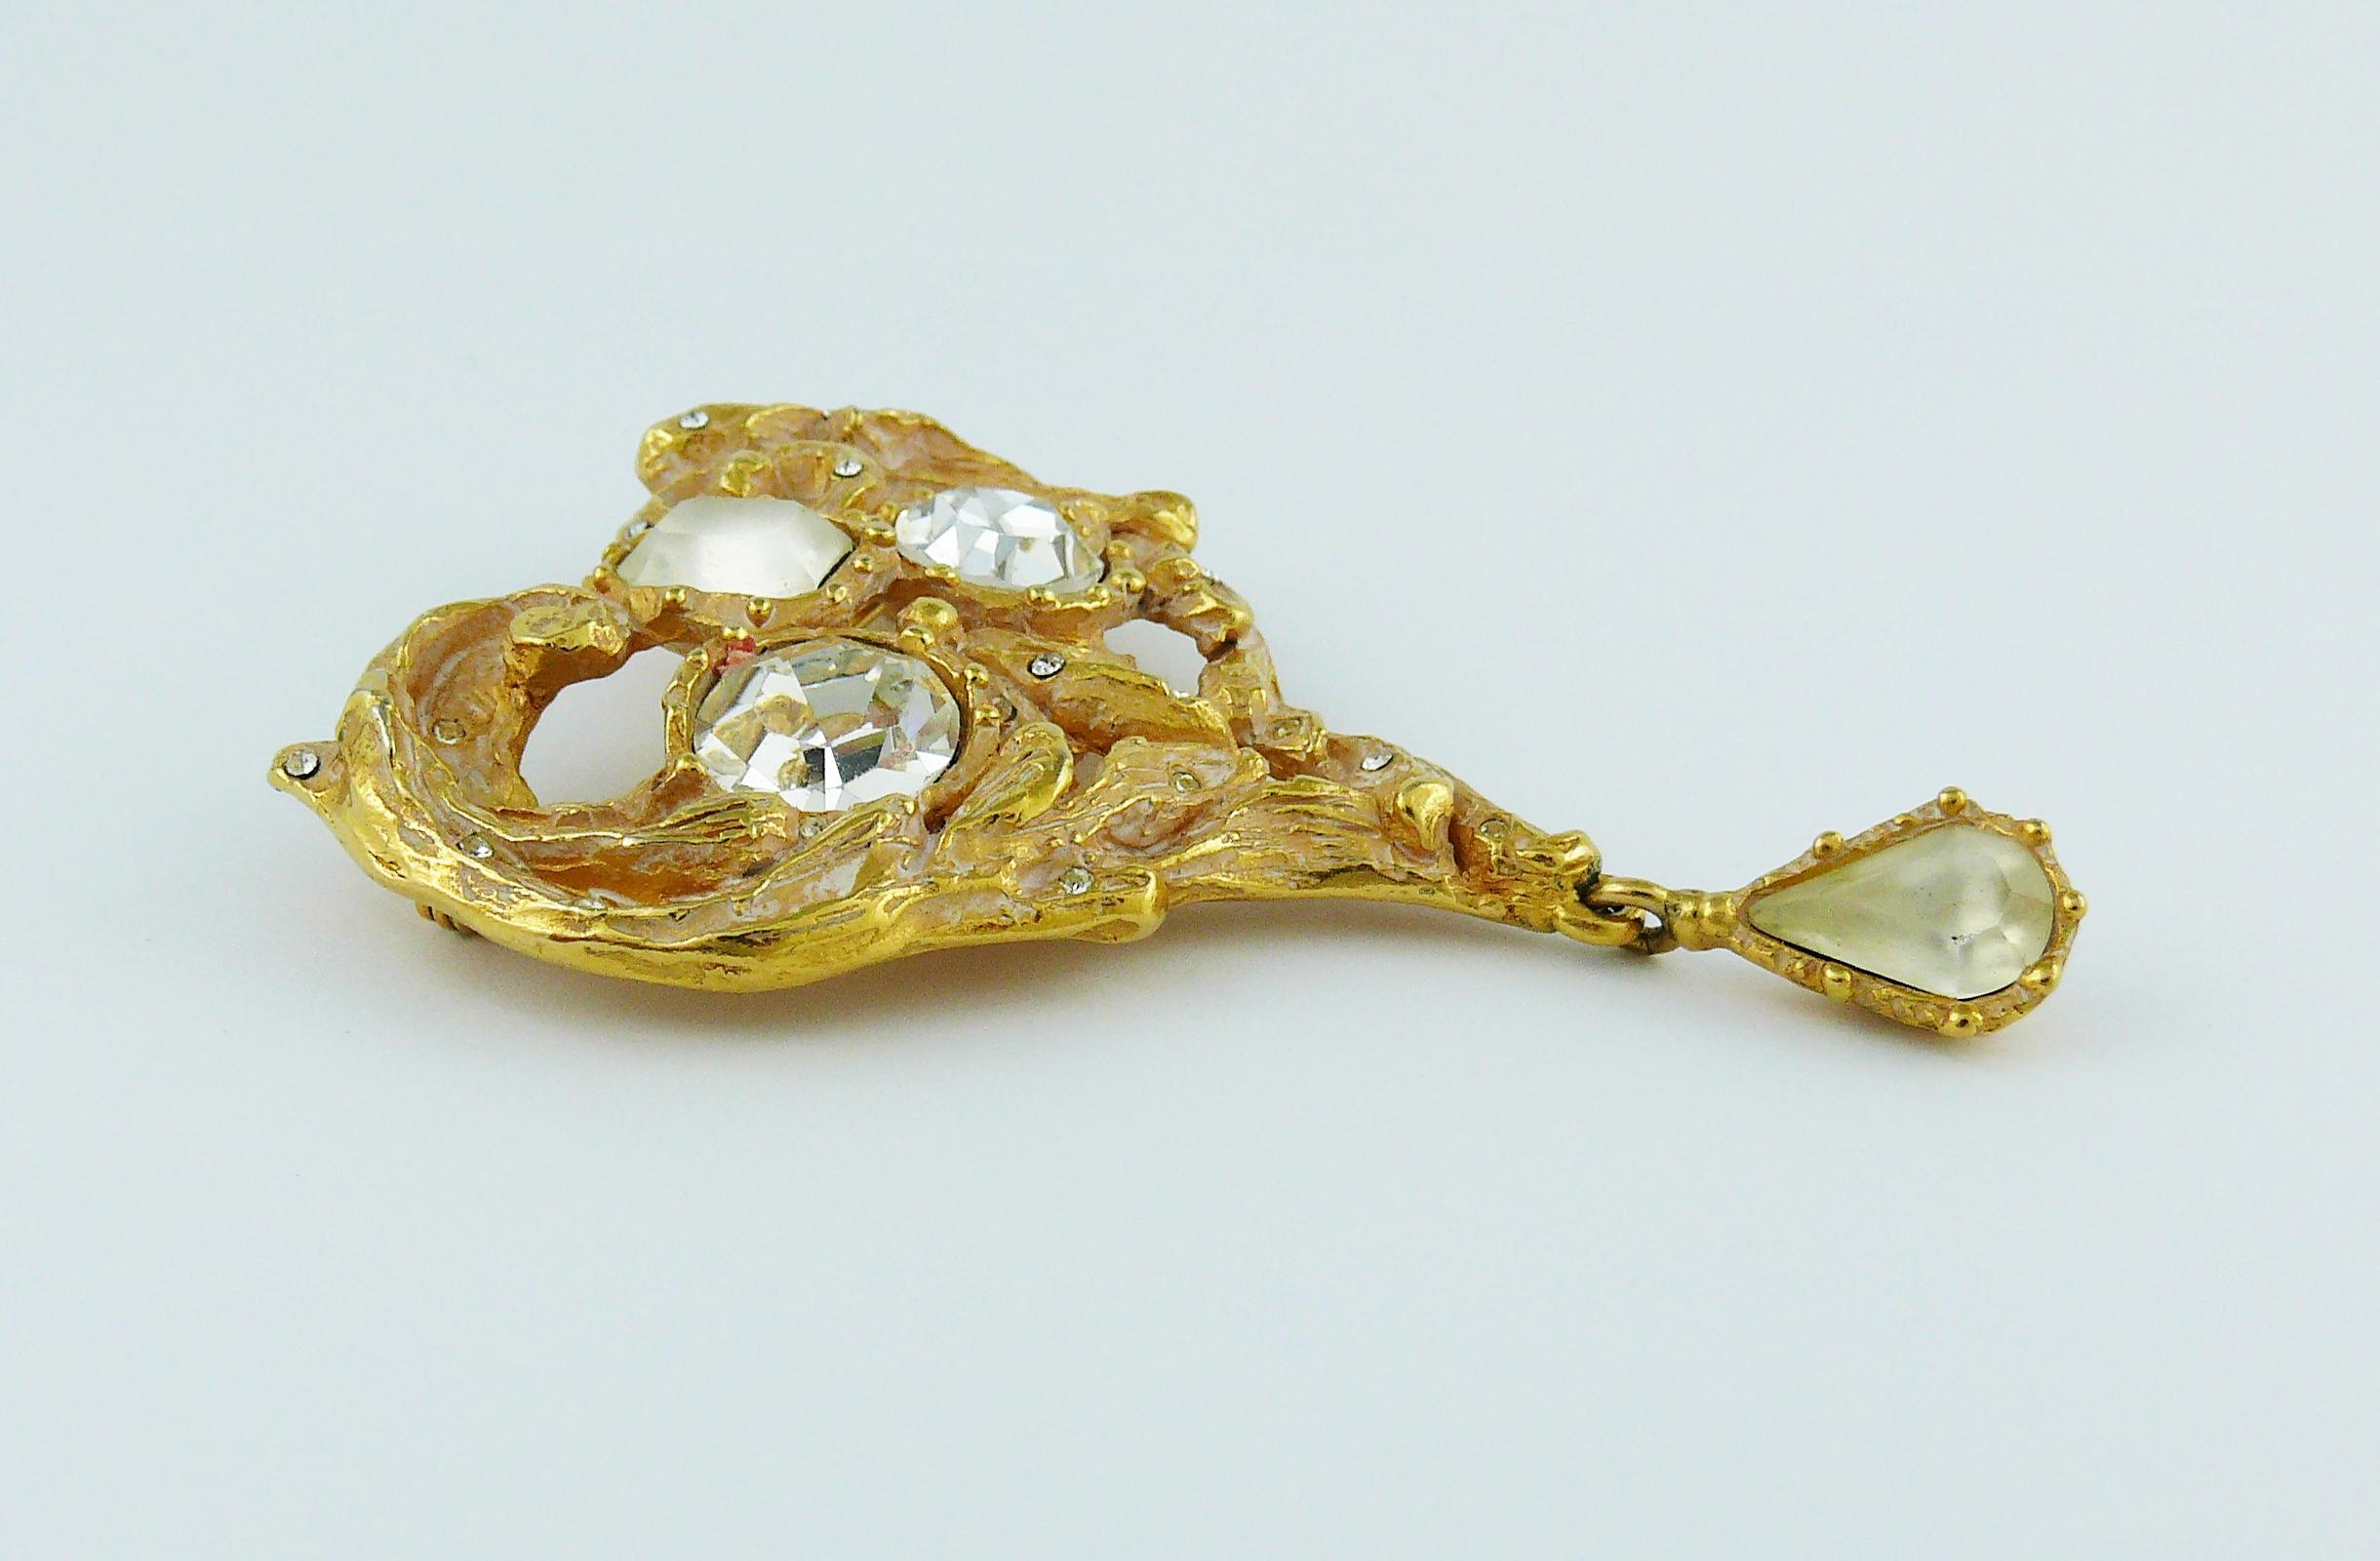 CHRISTIAN LACROIX vintage gold toned with patina heart brooch embellished with clear and frosted crystals.

Marked CHRISTIAN LACROIX CL Made in France.

Indicative measurements : height approx. 7.2 cm (2.83 inches) / max. width approx. 5.3 cm (2.09